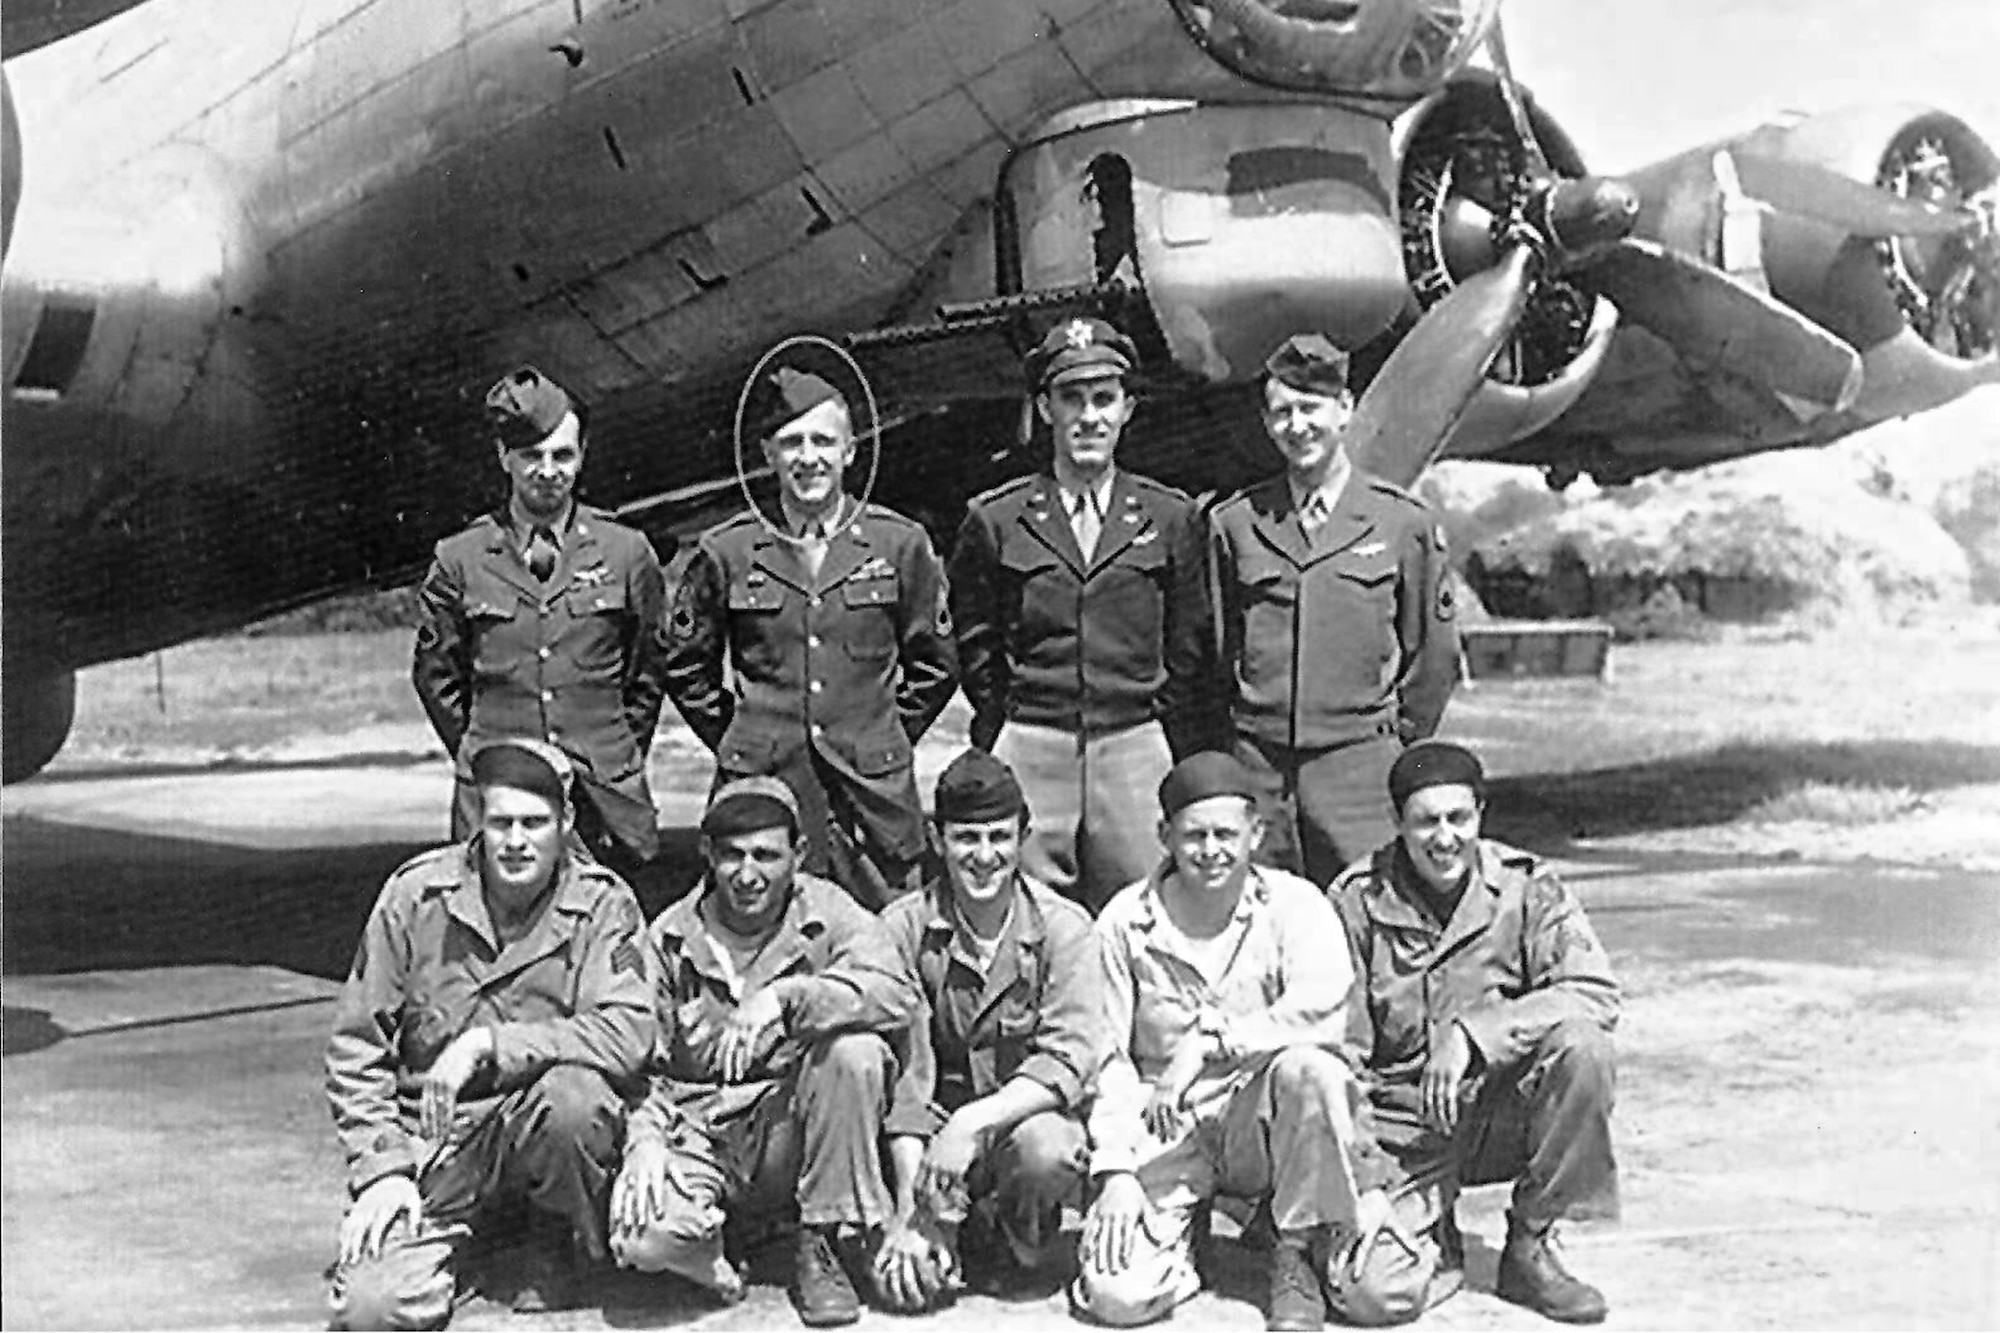 RAF ALCONBURY, United Kingdom –Tech. Sgt. Emil Dihlmann (circled) stands with a B-17 Flying Fortress crew before a mission during World War II. Dihlmann served at RAF Alconbury from 1943 to 1945 and he had such fond memories of his time there that his family asked if they could spread his ashes on the base after he passed away June 27 at the age of 96. (Photo courtesy of Emily Lewney)